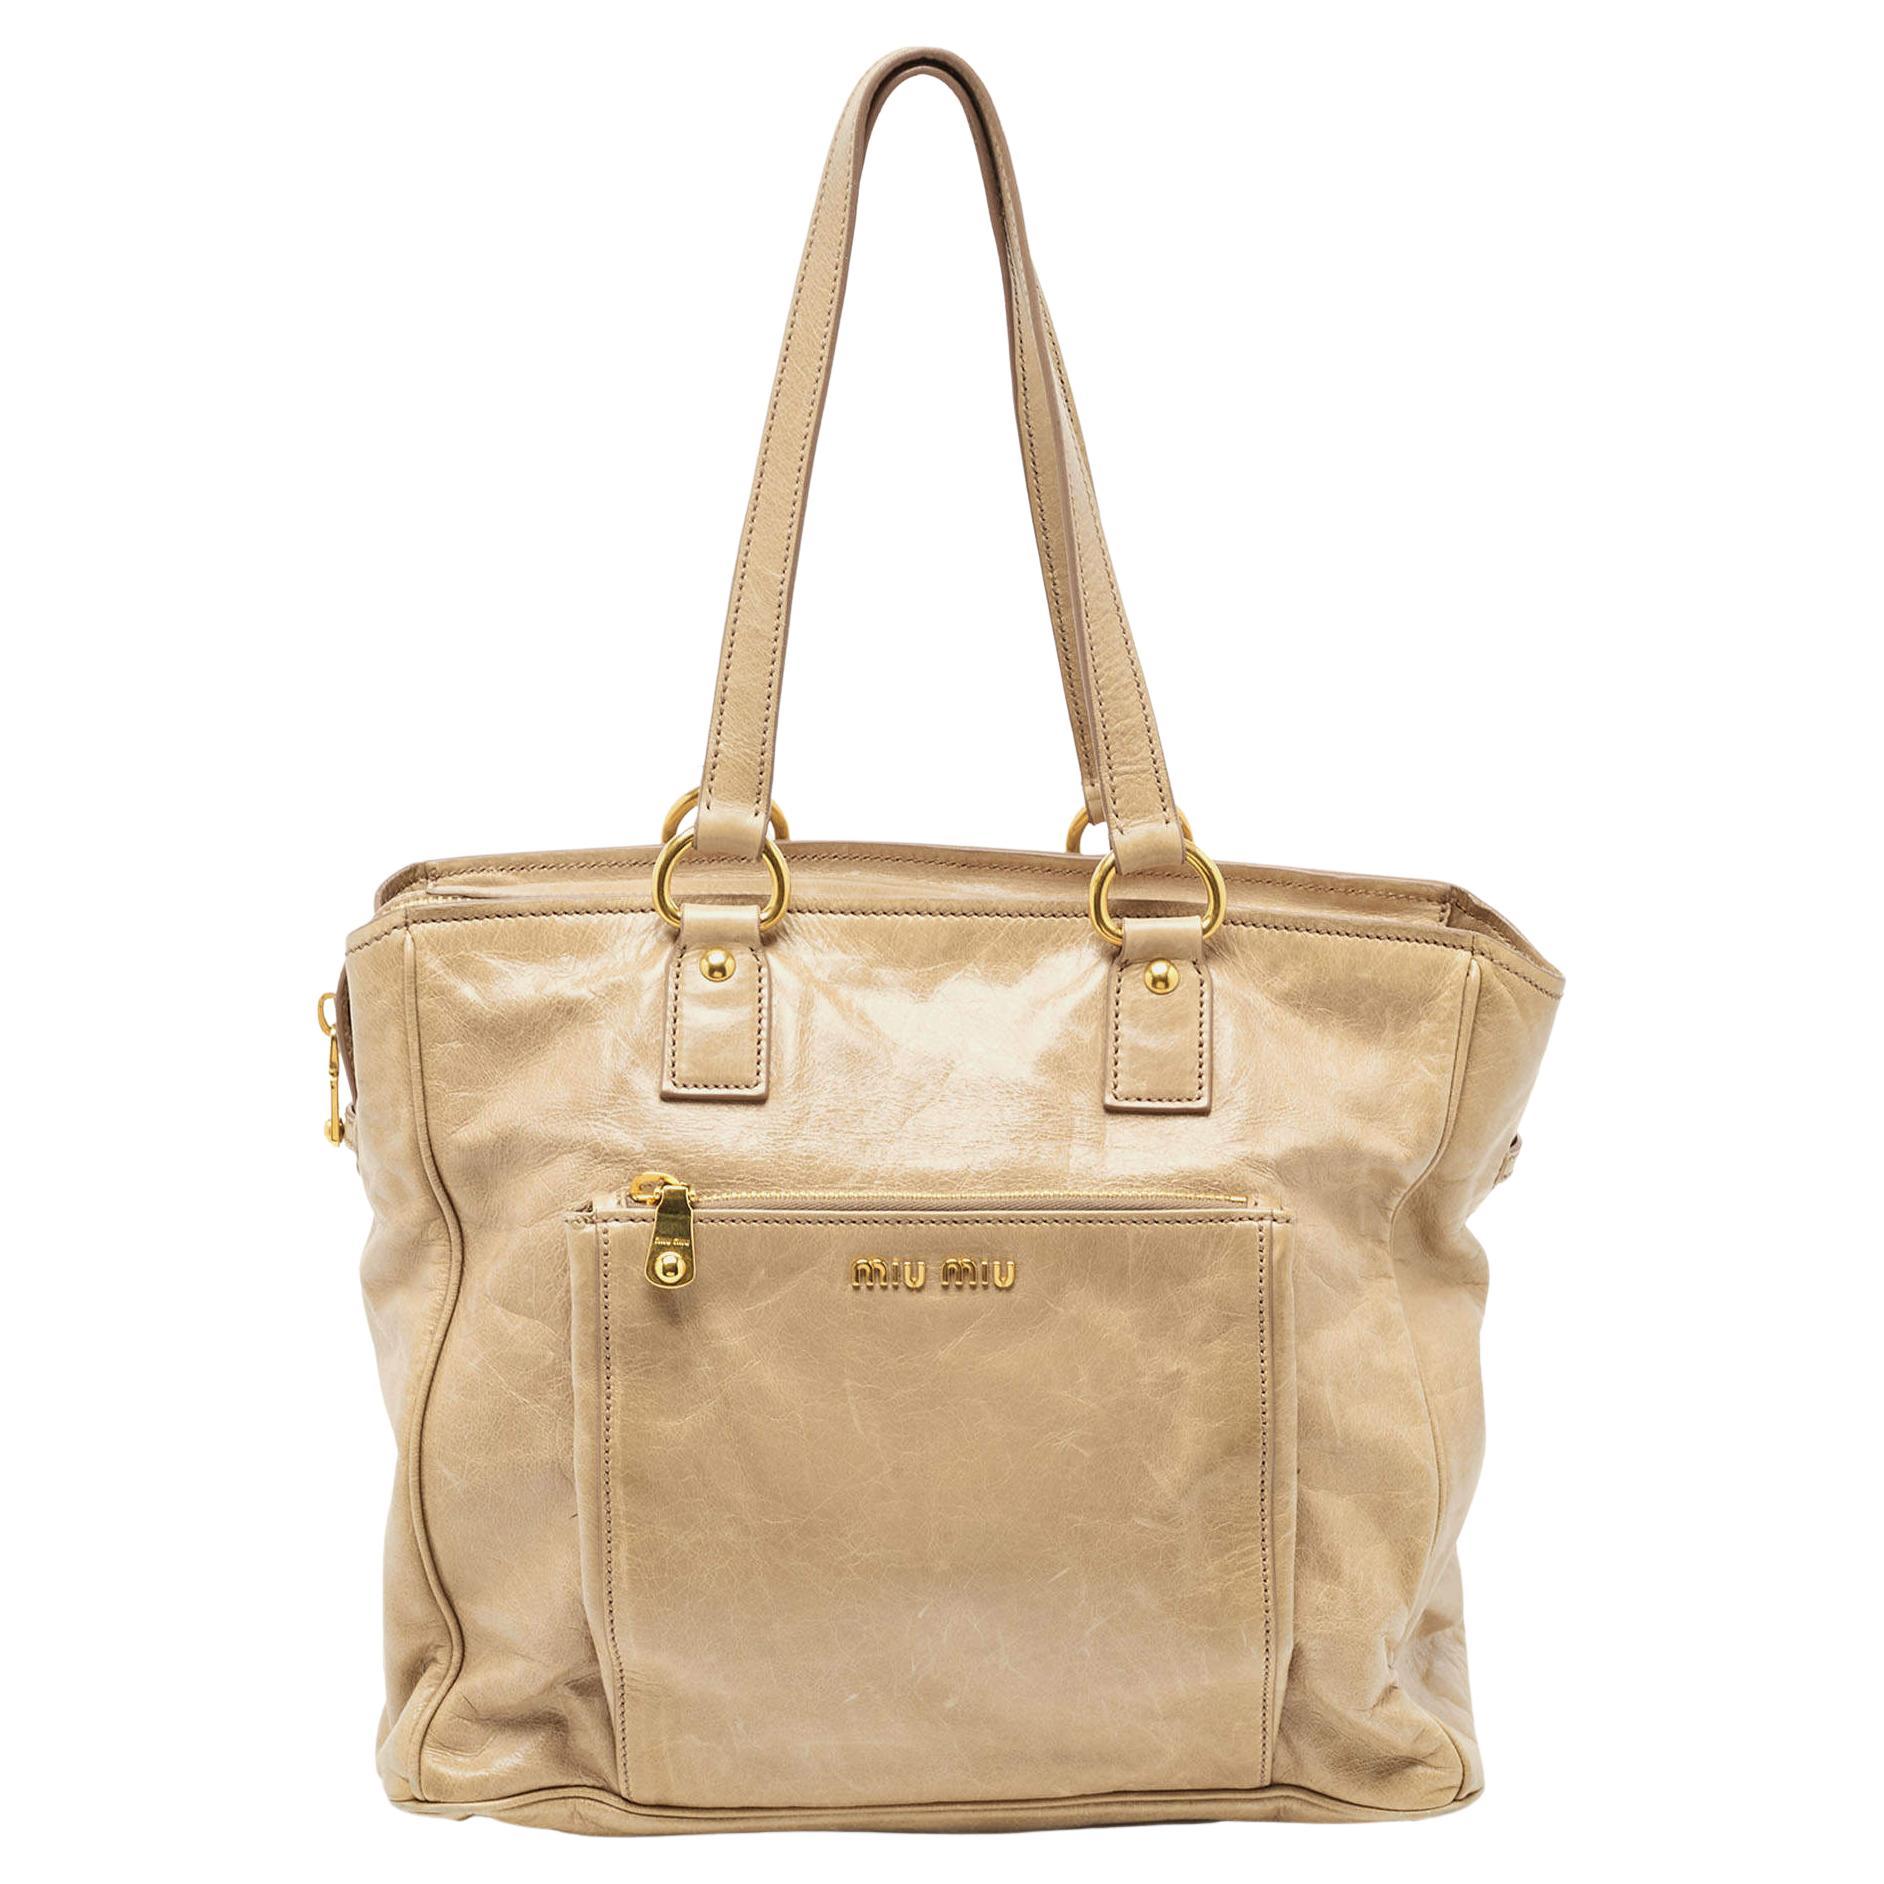 Miu Miu Beige Leather Front Pocket Tote For Sale